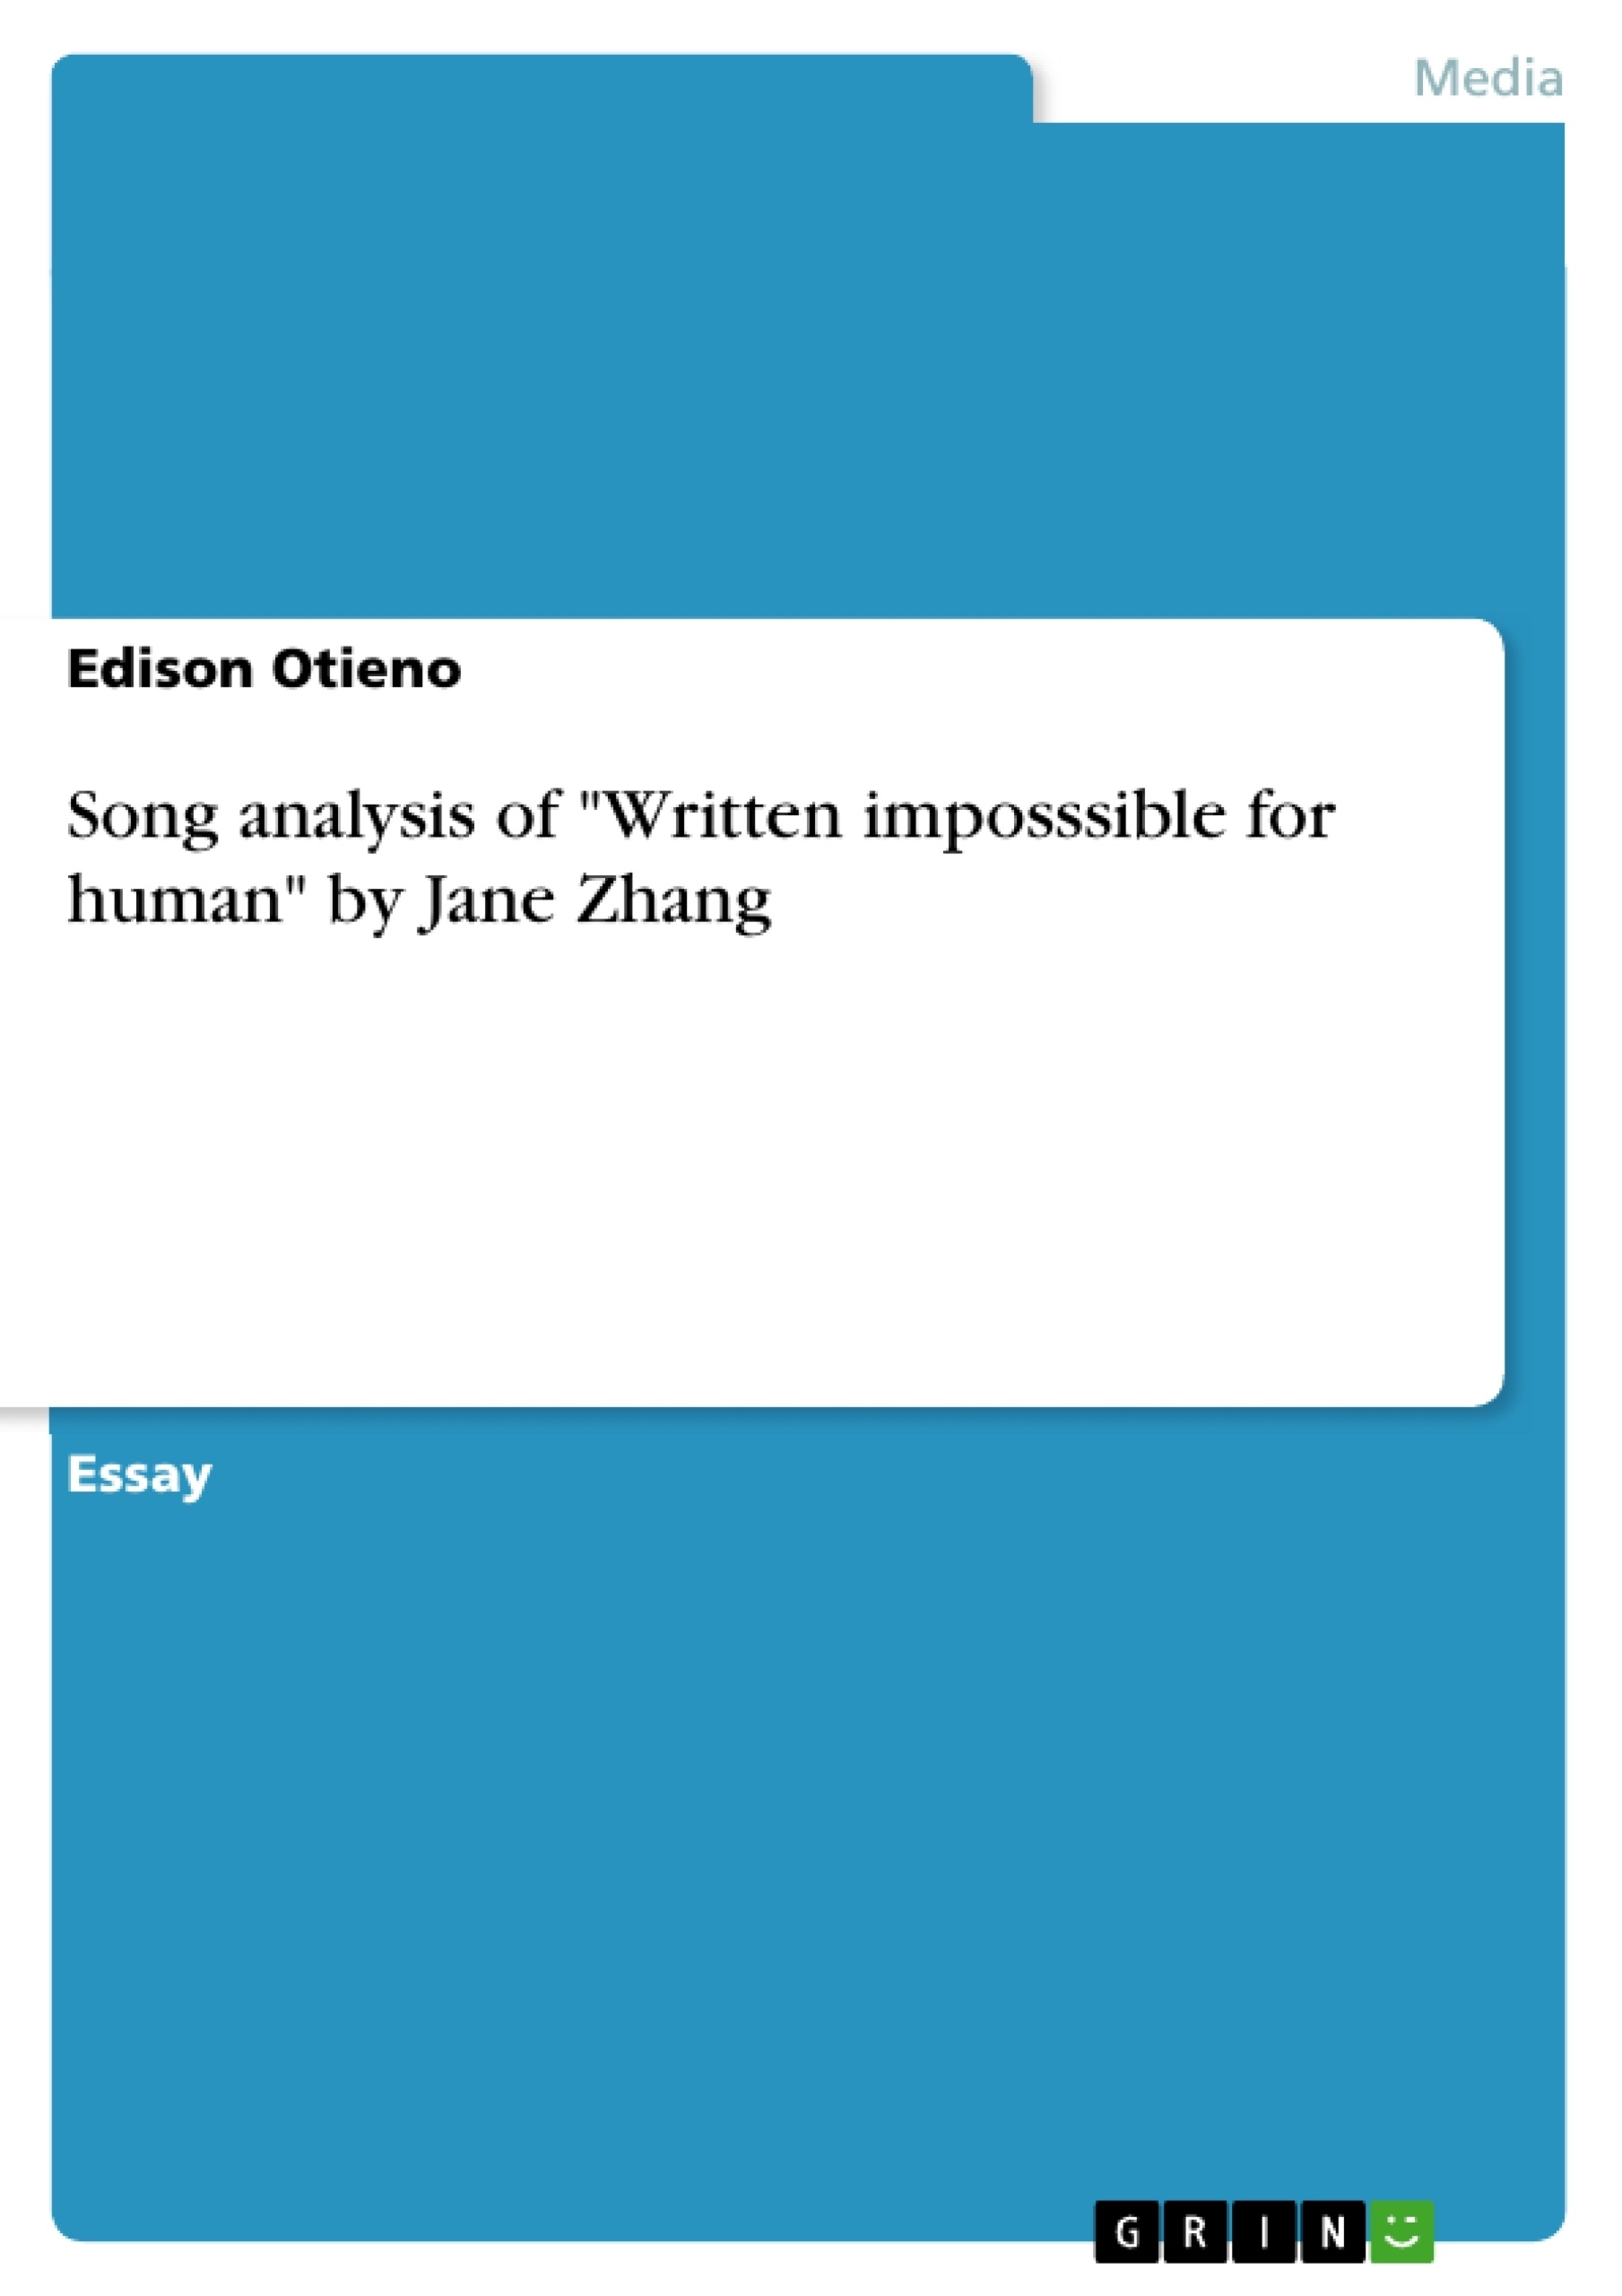 Título: Song analysis of "Written imposssible for human" by Jane Zhang